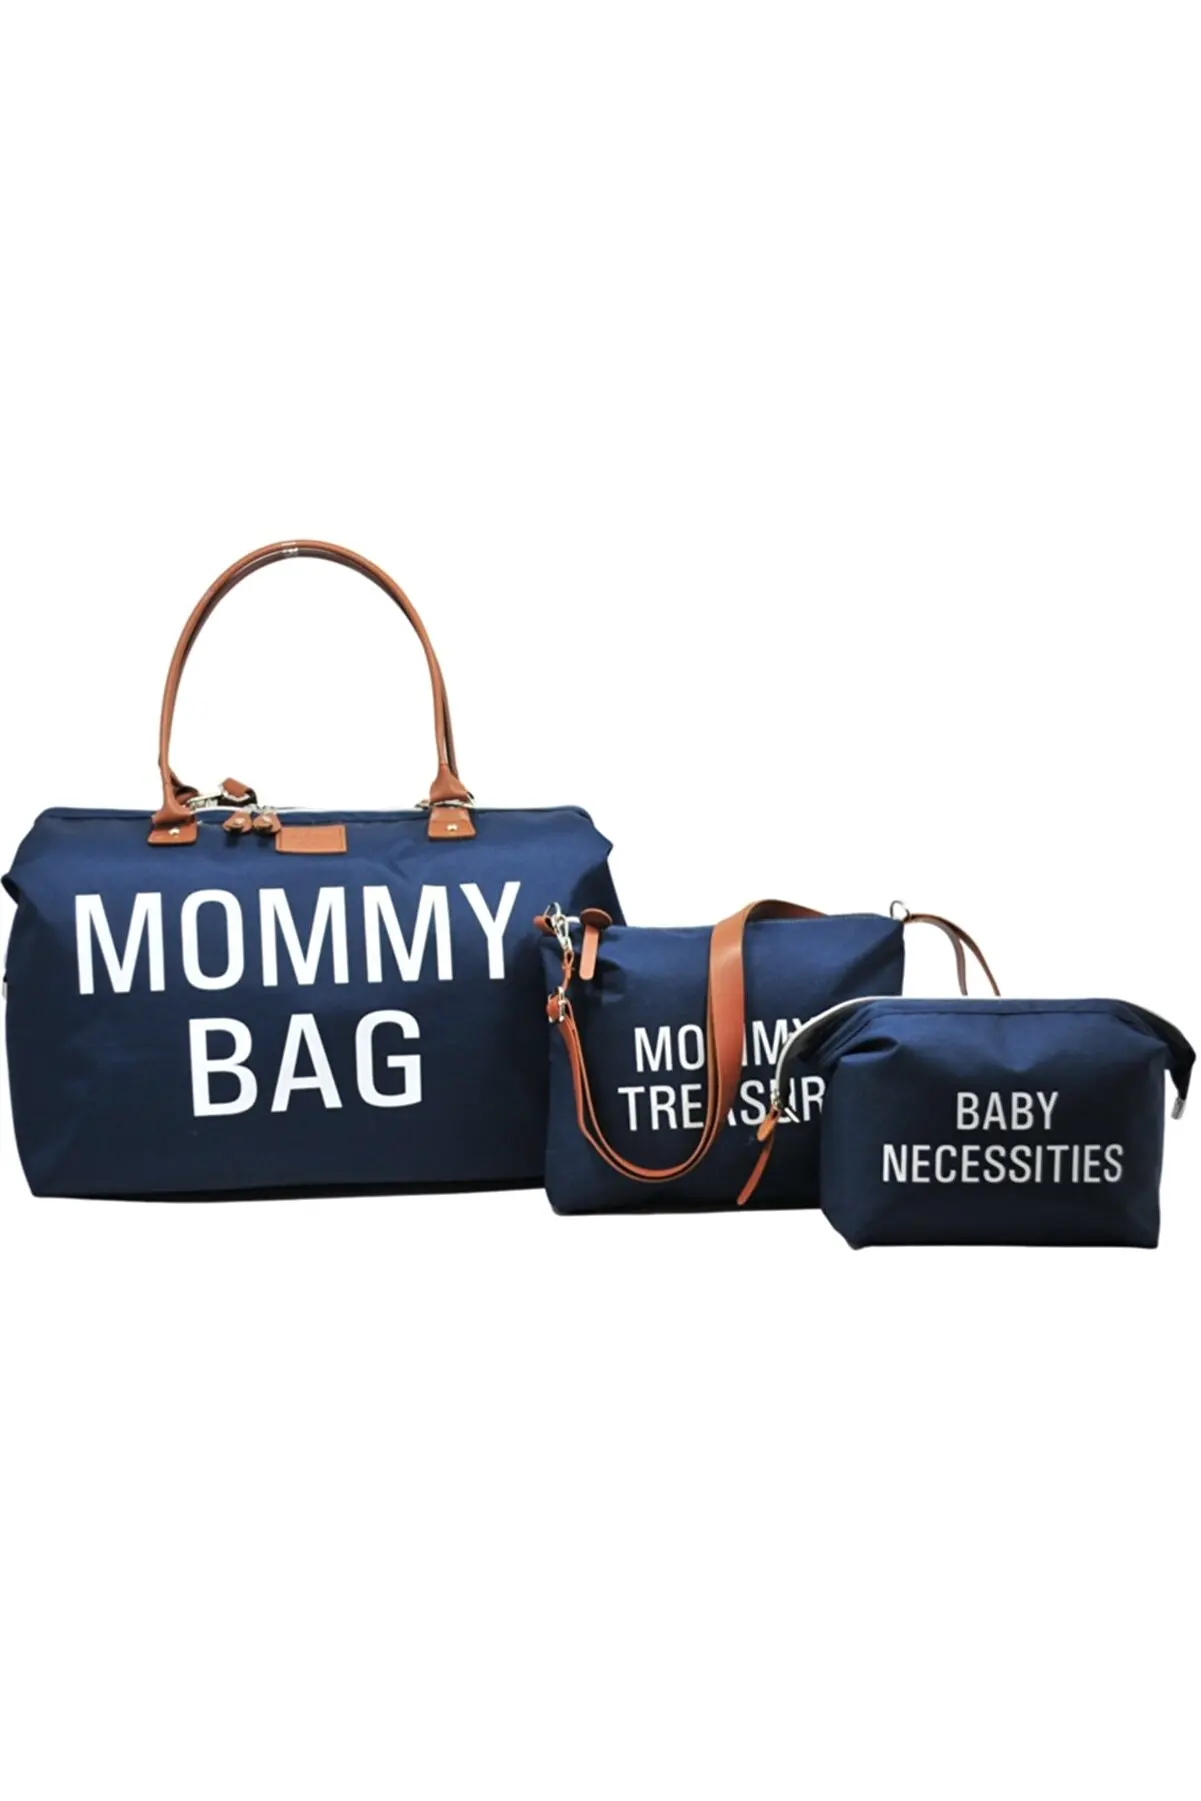 Set Of 3 Mother Baby Mommy Bag, Large Capacity Durable Car Case , Travel Stroller Suitcase, mama Totes Purse